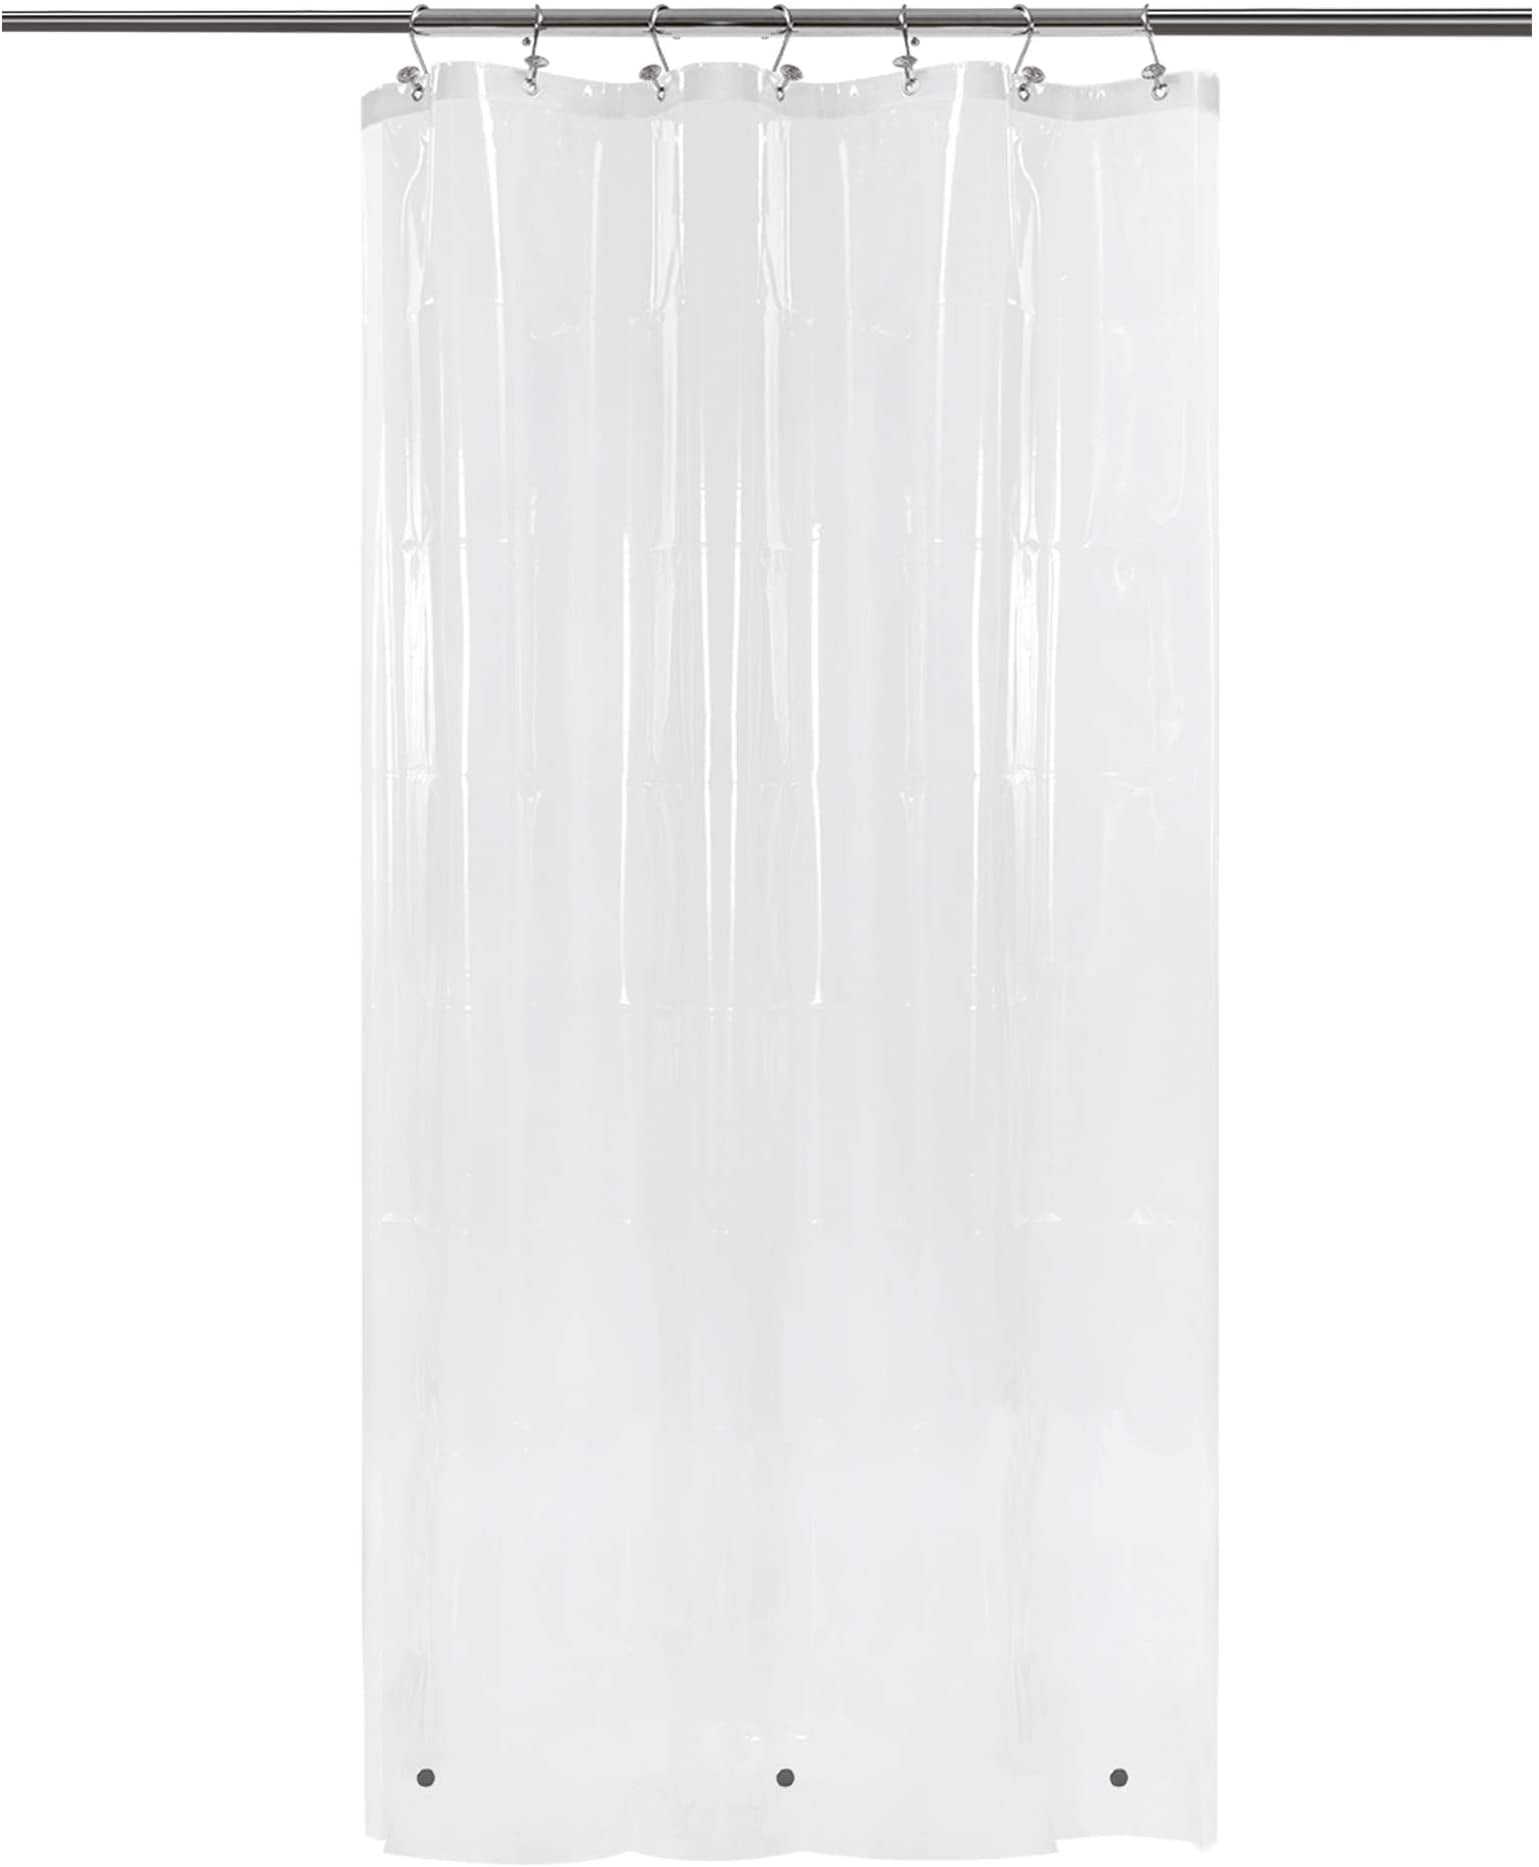 Narrow Shower Curtain Liner With 3, 78 Extra Long Waterproof Vinyl Shower Curtain Liner